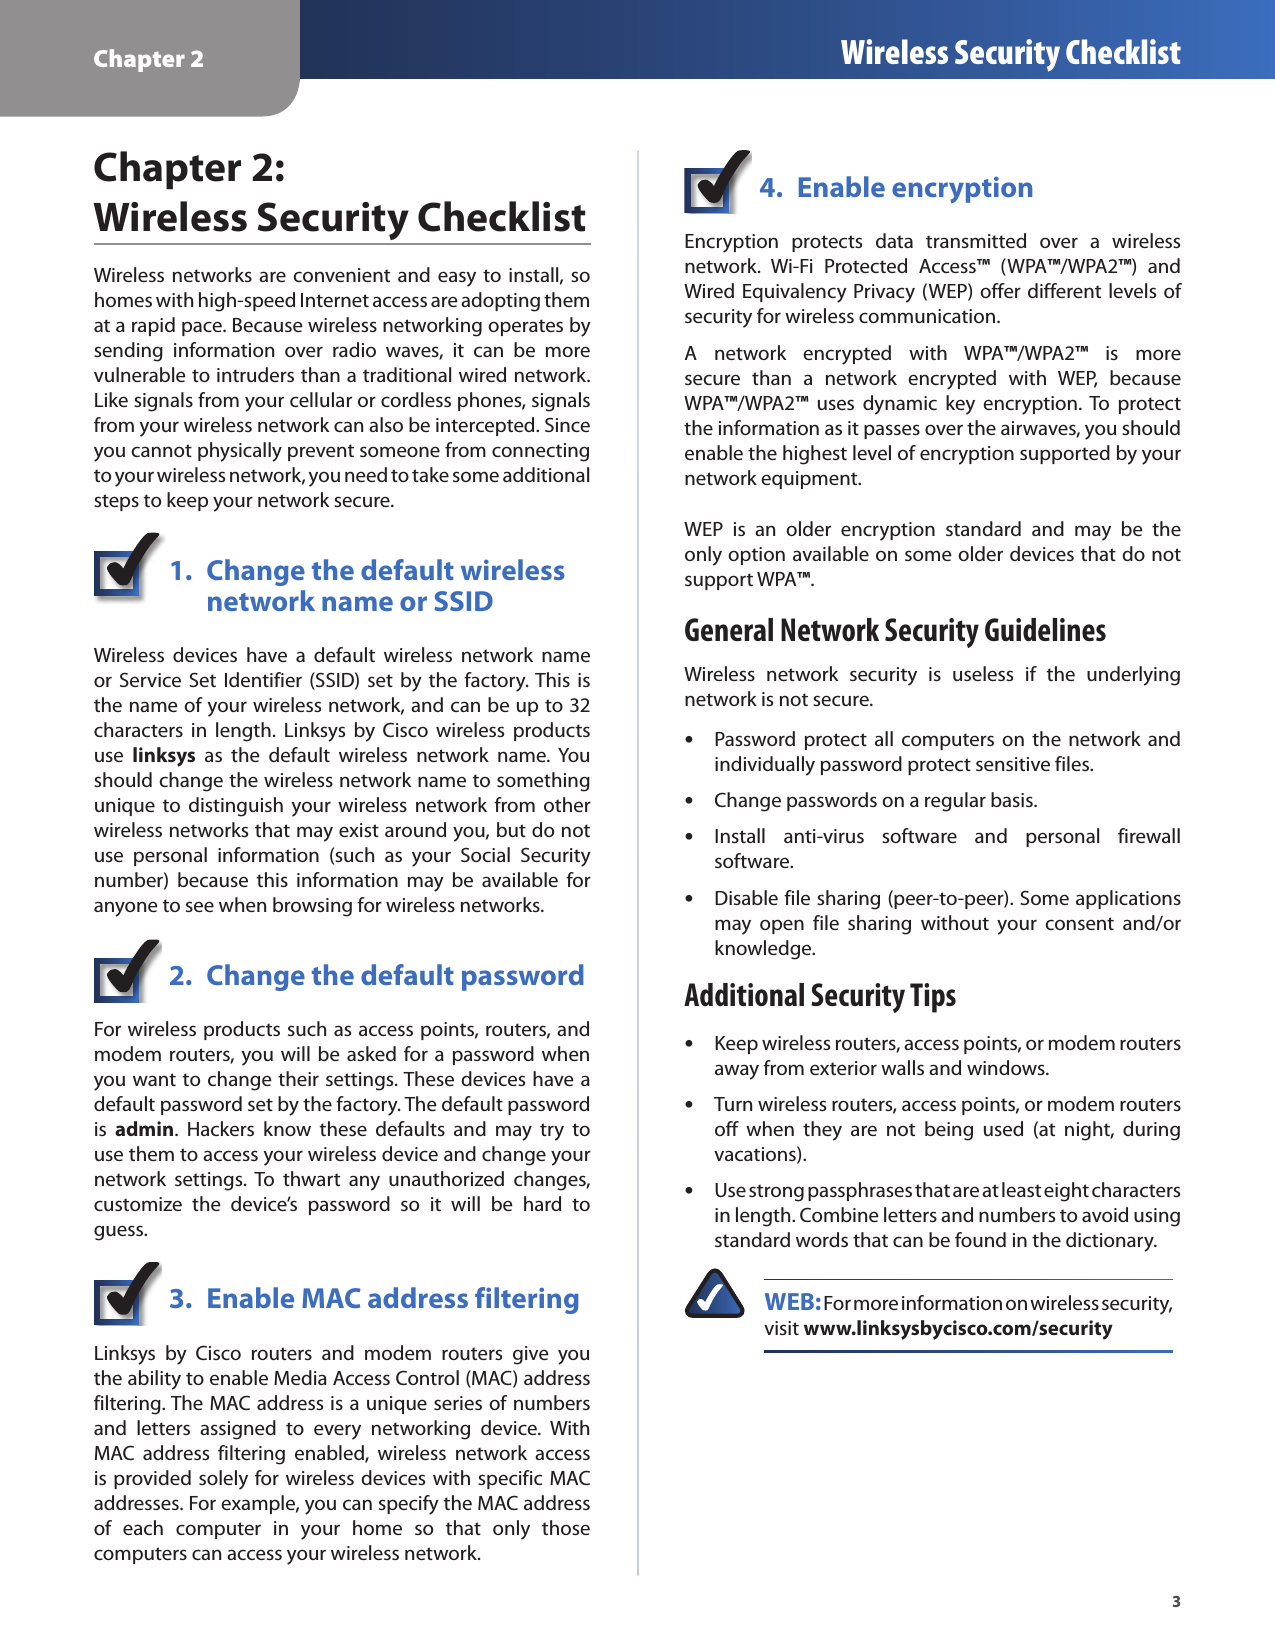 Chapter 2 Wireless Security Checklist3Chapter 2:  Wireless Security ChecklistWireless networks are convenient  and easy to install, so homes with high-speed Internet access are adopting them at a rapid pace. Because wireless networking operates by sending  information  over  radio  waves,  it  can  be  more vulnerable to intruders than a traditional wired network. Like signals from your cellular or cordless phones, signals from your wireless network can also be intercepted. Since you cannot physically prevent someone from connecting to your wireless network, you need to take some additional steps to keep your network secure. 1.  Change the default wireless    network name or SSIDWireless  devices  have  a  default  wireless  network  name or Service Set Identifier (SSID)  set  by the  factory. This is the name of your wireless network, and can be up to 32 characters  in  length.  Linksys  by  Cisco  wireless  products use  linksys  as  the  default  wireless  network  name.  You should change the wireless network name to something unique  to  distinguish  your  wireless  network  from  other wireless networks that may exist around you, but do not use  personal  information  (such  as  your  Social  Security number)  because  this  information  may  be  available  for anyone to see when browsing for wireless networks. 2.  Change the default passwordFor wireless products such as access points, routers, and modem routers, you will be asked for a  password when you want to change their settings. These devices have a default password set by the factory. The default password is  admin.  Hackers  know  these  defaults  and  may  try  to use them to access your wireless device and change your network  settings. To  thwart  any  unauthorized  changes, customize  the  device’s  password  so  it  will  be  hard  to guess.3.  Enable MAC address filteringLinksys  by  Cisco  routers  and  modem  routers  give  you the ability to enable Media Access Control (MAC) address filtering. The MAC address is a unique series of numbers and  letters  assigned  to  every  networking  device.  With MAC  address  filtering  enabled,  wireless  network  access is provided solely for wireless devices with specific MAC addresses. For example, you can specify the MAC address of  each  computer  in  your  home  so  that  only  those computers can access your wireless network. 4.  Enable encryptionEncryption  protects  data  transmitted  over  a  wireless network.  Wi-Fi  Protected  Access™  (WPA™/WPA2™)  and Wired Equivalency Privacy (WEP) offer different levels of security for wireless communication.A  network  encrypted  with  WPA™/WPA2™  is  more secure  than  a  network  encrypted  with  WEP,  because  WPA™/WPA2™  uses  dynamic  key  encryption.  To  protect the information as it passes over the airwaves, you should enable the highest level of encryption supported by your network equipment. WEP  is  an  older  encryption  standard  and  may  be  the only option available on some older devices that do not support WPA™.General Network Security GuidelinesWireless  network  security  is  useless  if  the  underlying network is not secure.  •Password protect  all  computers  on  the  network  and individually password protect sensitive files. •Change passwords on a regular basis. •Install  anti-virus  software  and  personal  firewall software. •Disable file sharing (peer-to-peer). Some applications may  open  file  sharing  without  your  consent  and/or knowledge.Additional Security Tips •Keep wireless routers, access points, or modem routers away from exterior walls and windows. •Turn wireless routers, access points, or modem routers off  when  they  are  not  being  used  (at  night,  during vacations). •Use strong passphrases that are at least eight characters in length. Combine letters and numbers to avoid using standard words that can be found in the dictionary. WEB: For more information on wireless security, visit www.linksysbycisco.com/security